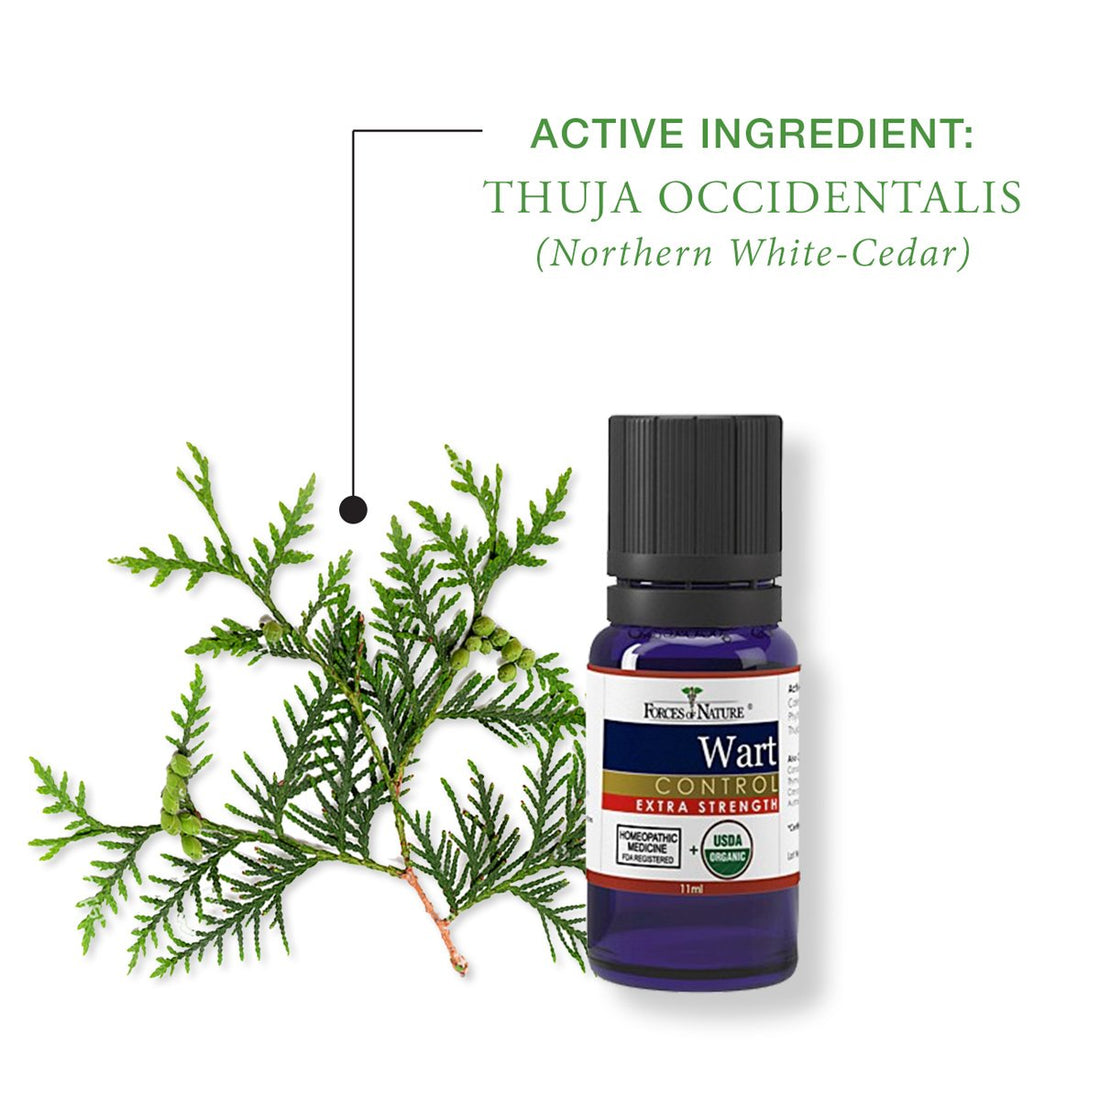 Why we use Thuja Occidentalis to Remove Warts